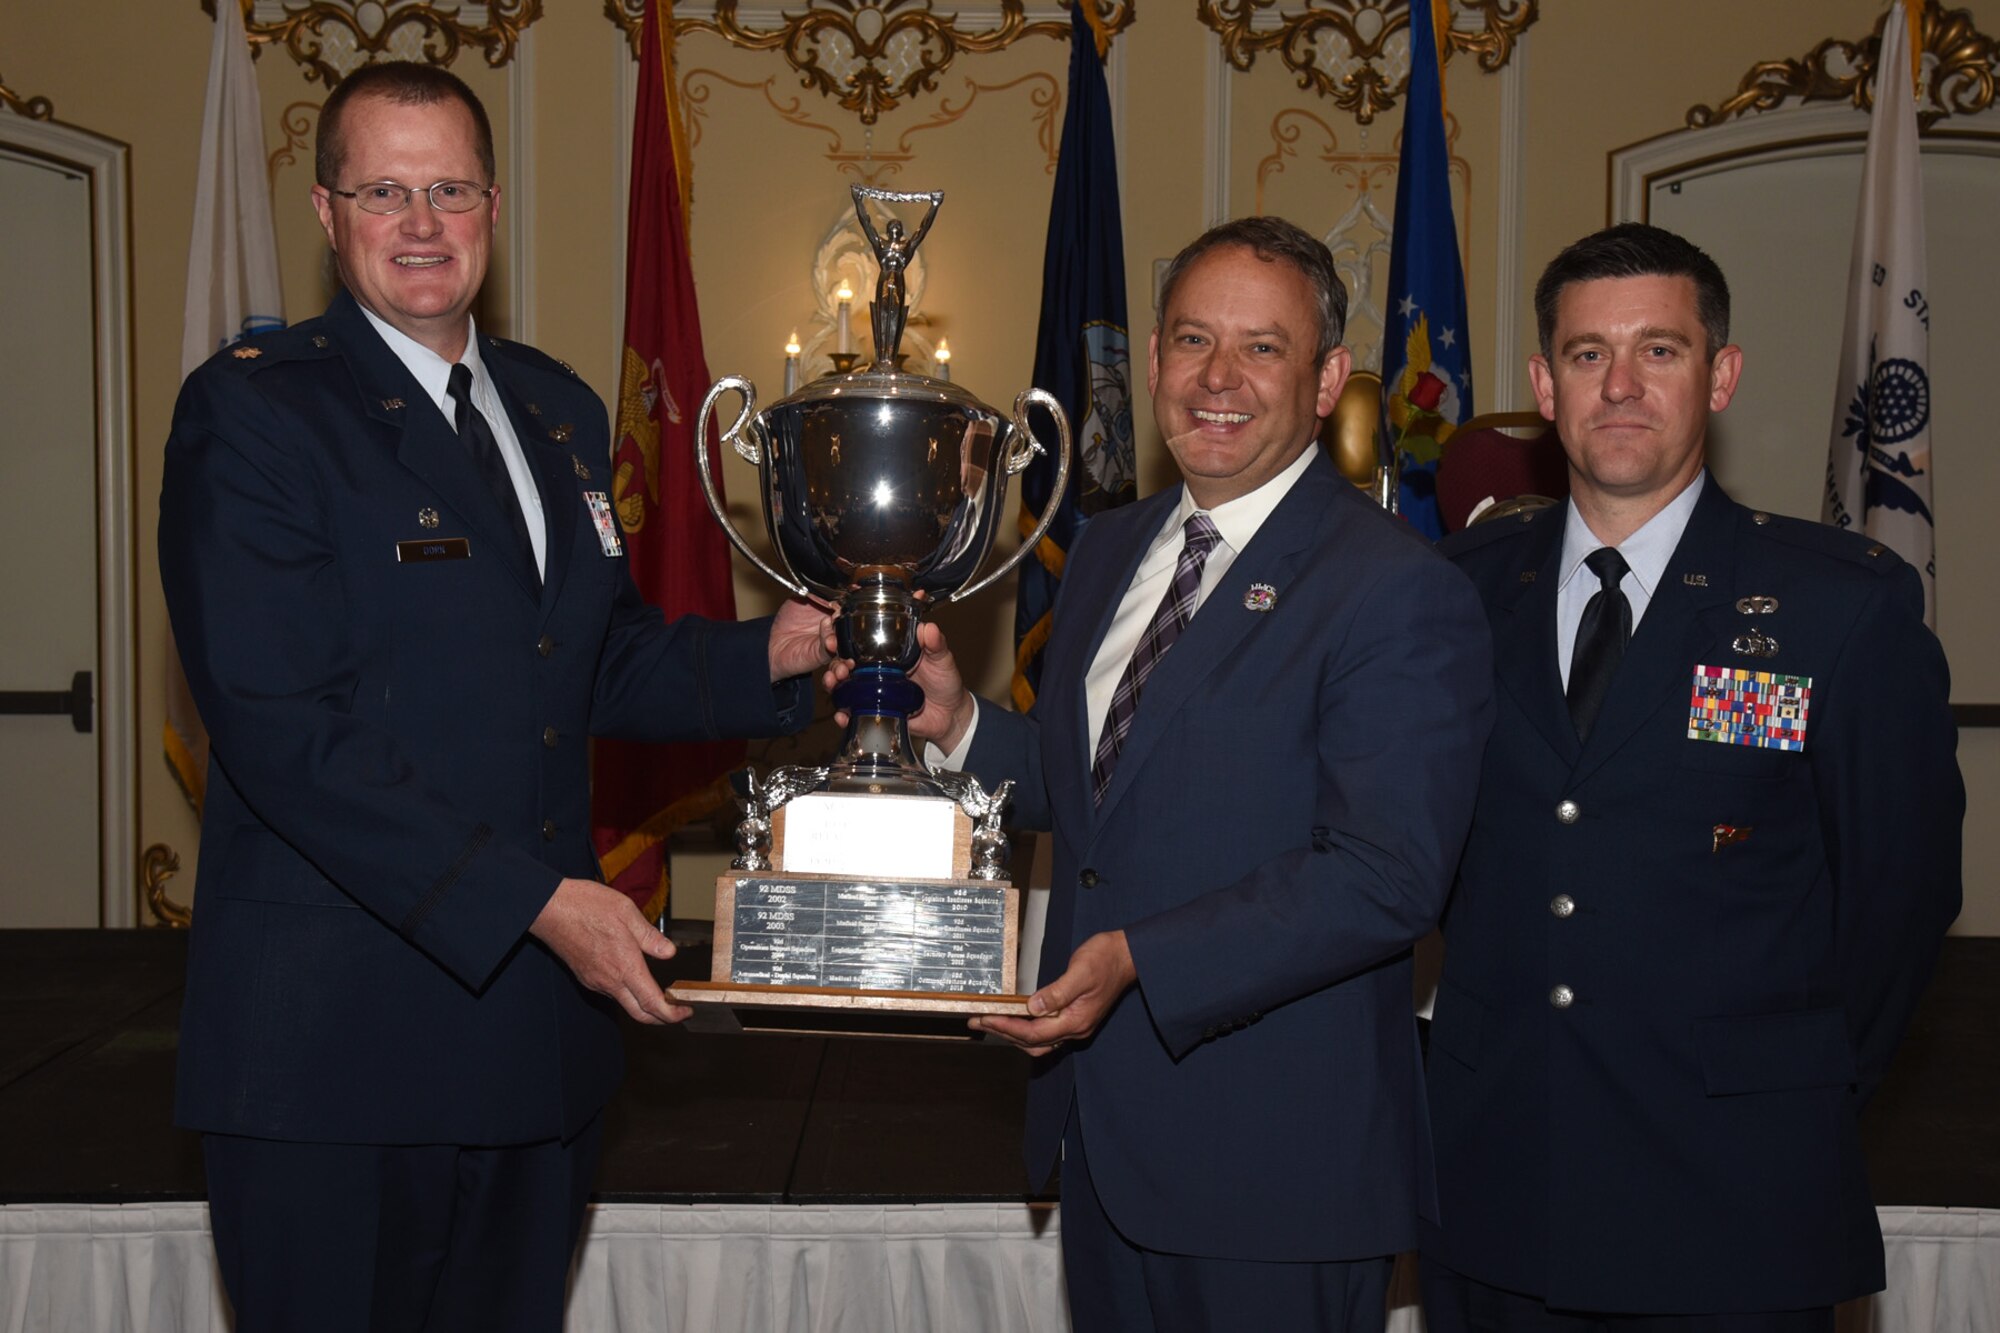 Lt. Col. James Dorn, 92nd Aircraft Maintenance Squadron commander, and 1st Lt. Dan Reed, 92nd AMXS aircraft maintenance unit officer in charge, accept the Neal Fosseen Award from Spokane Mayor, David Condon, during a community event May 19, 2016, in Spokane, Wash. The 92nd AMXS has won this prestigious award two years in a row for thousands of man-hours dedicated to the Spokane community and their overall excellence in community service.